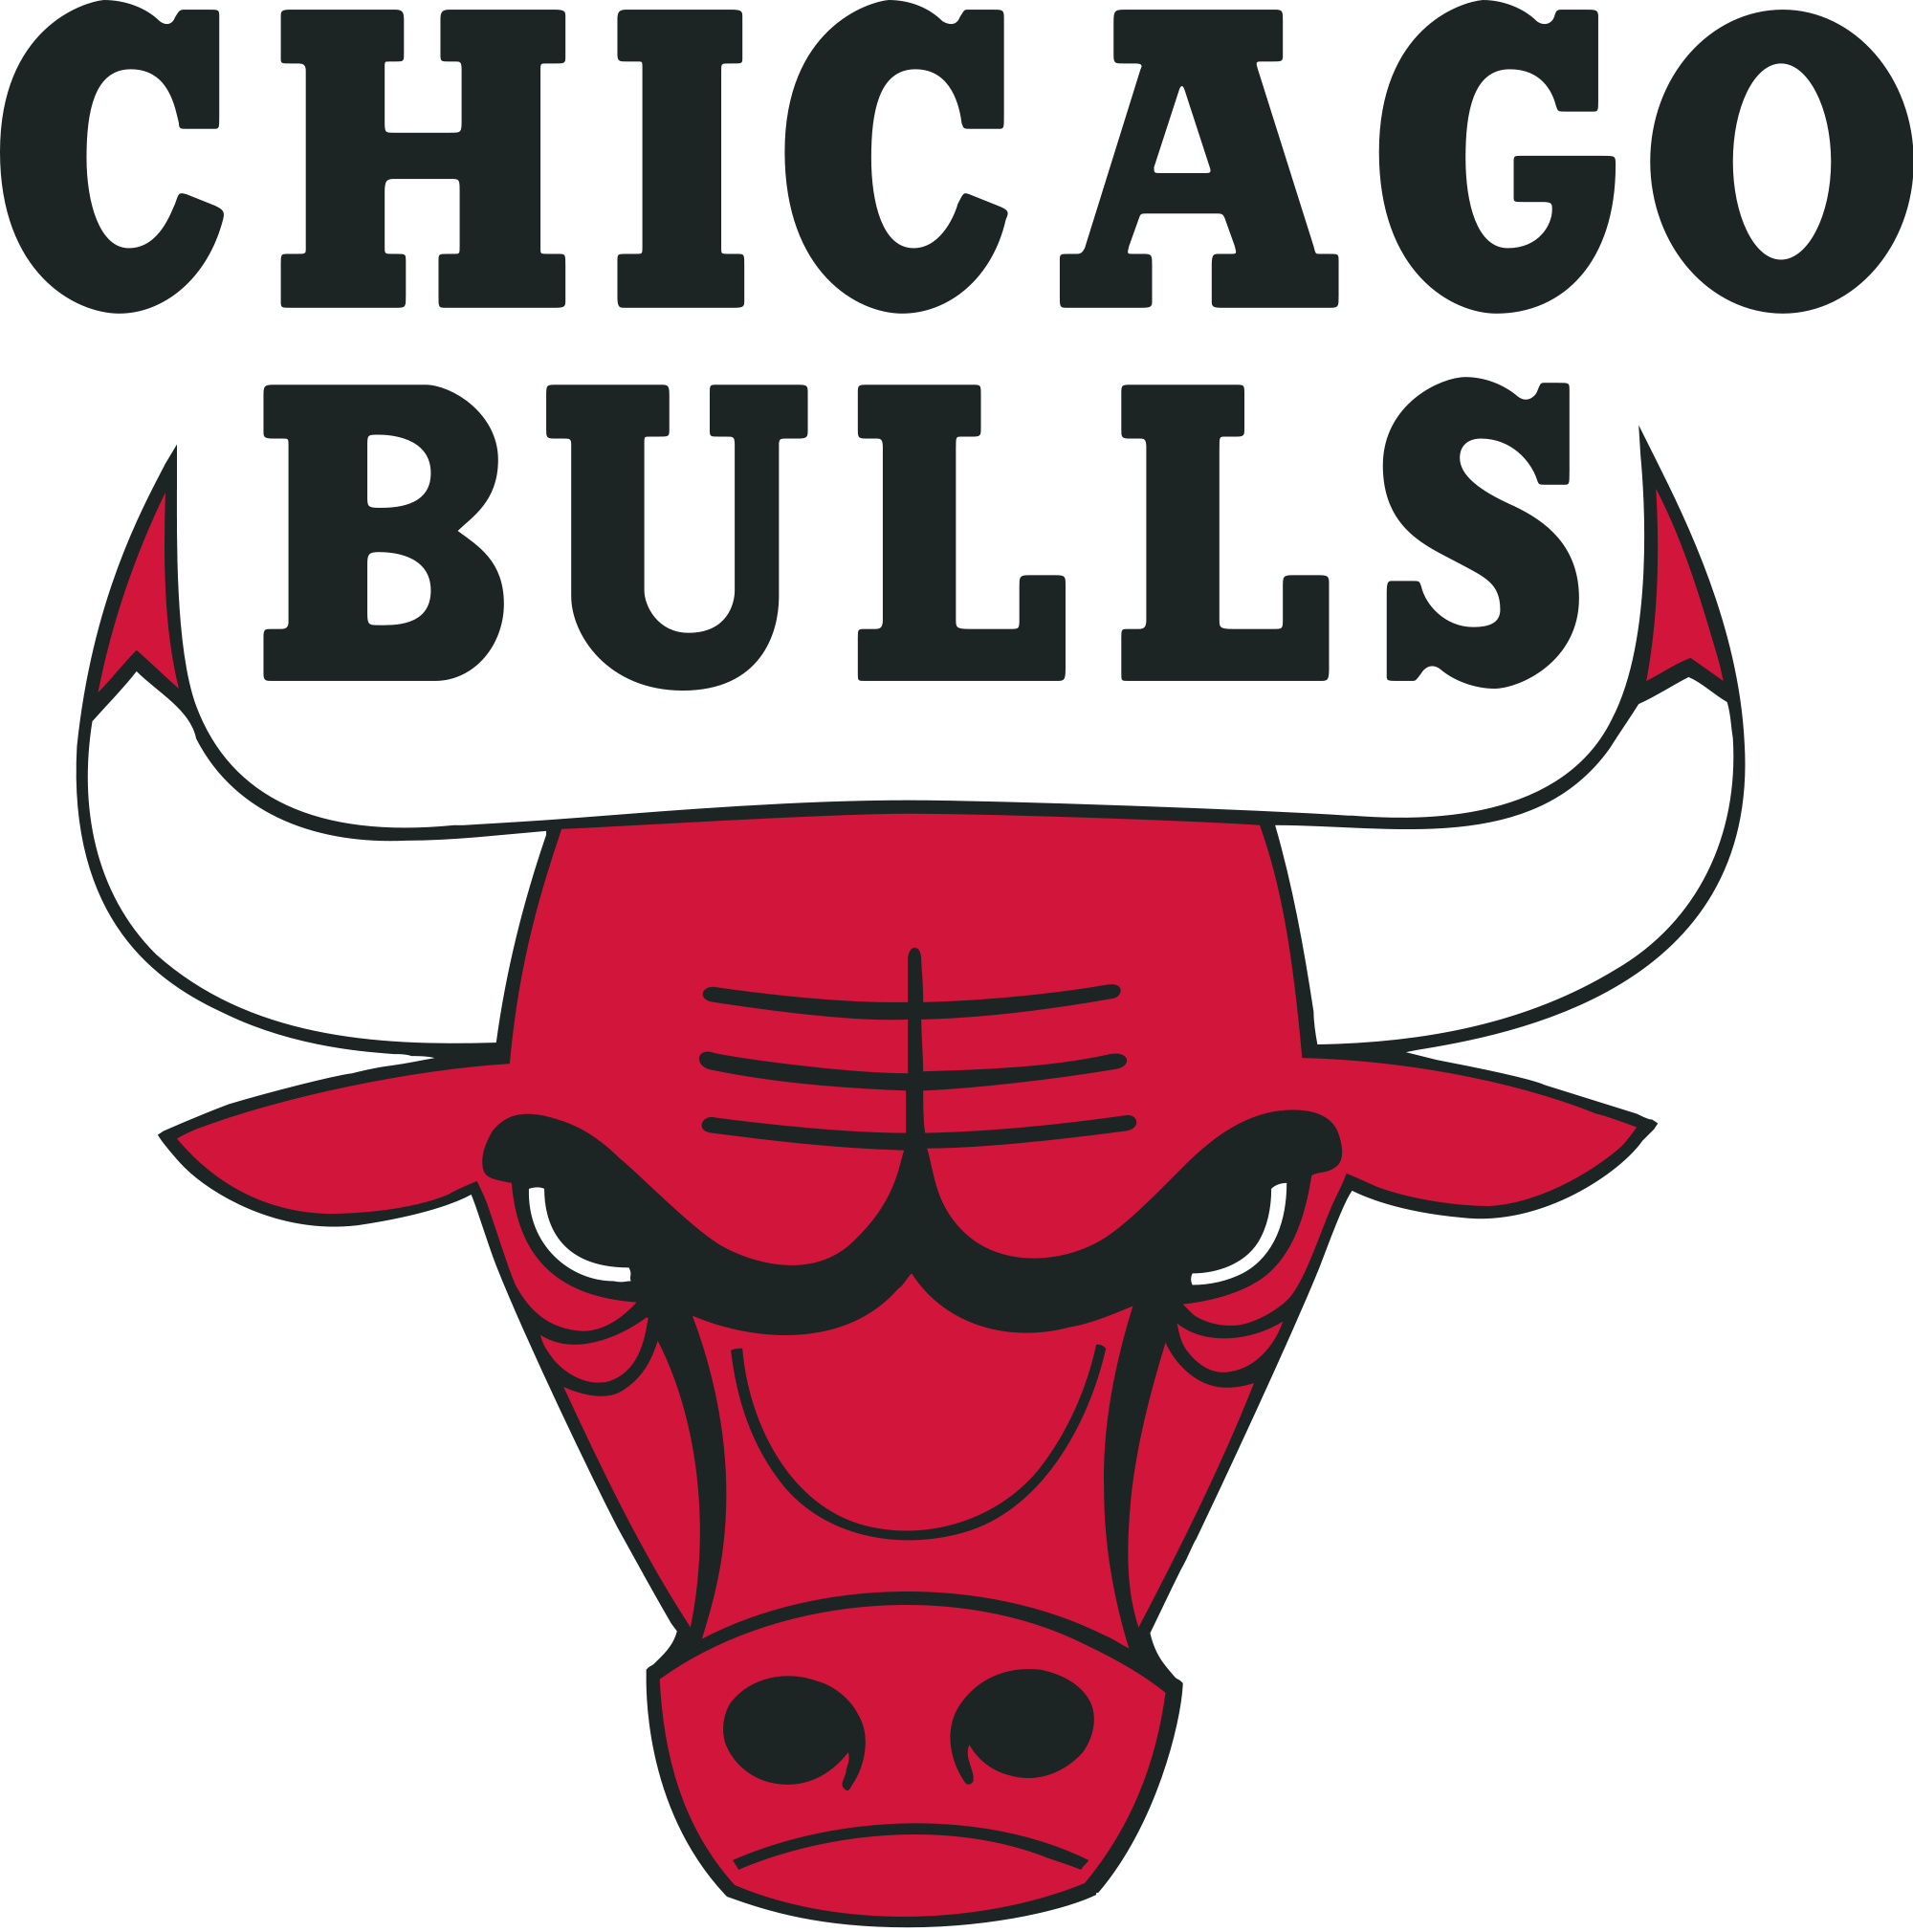 1000+ images about Chicago Bulls